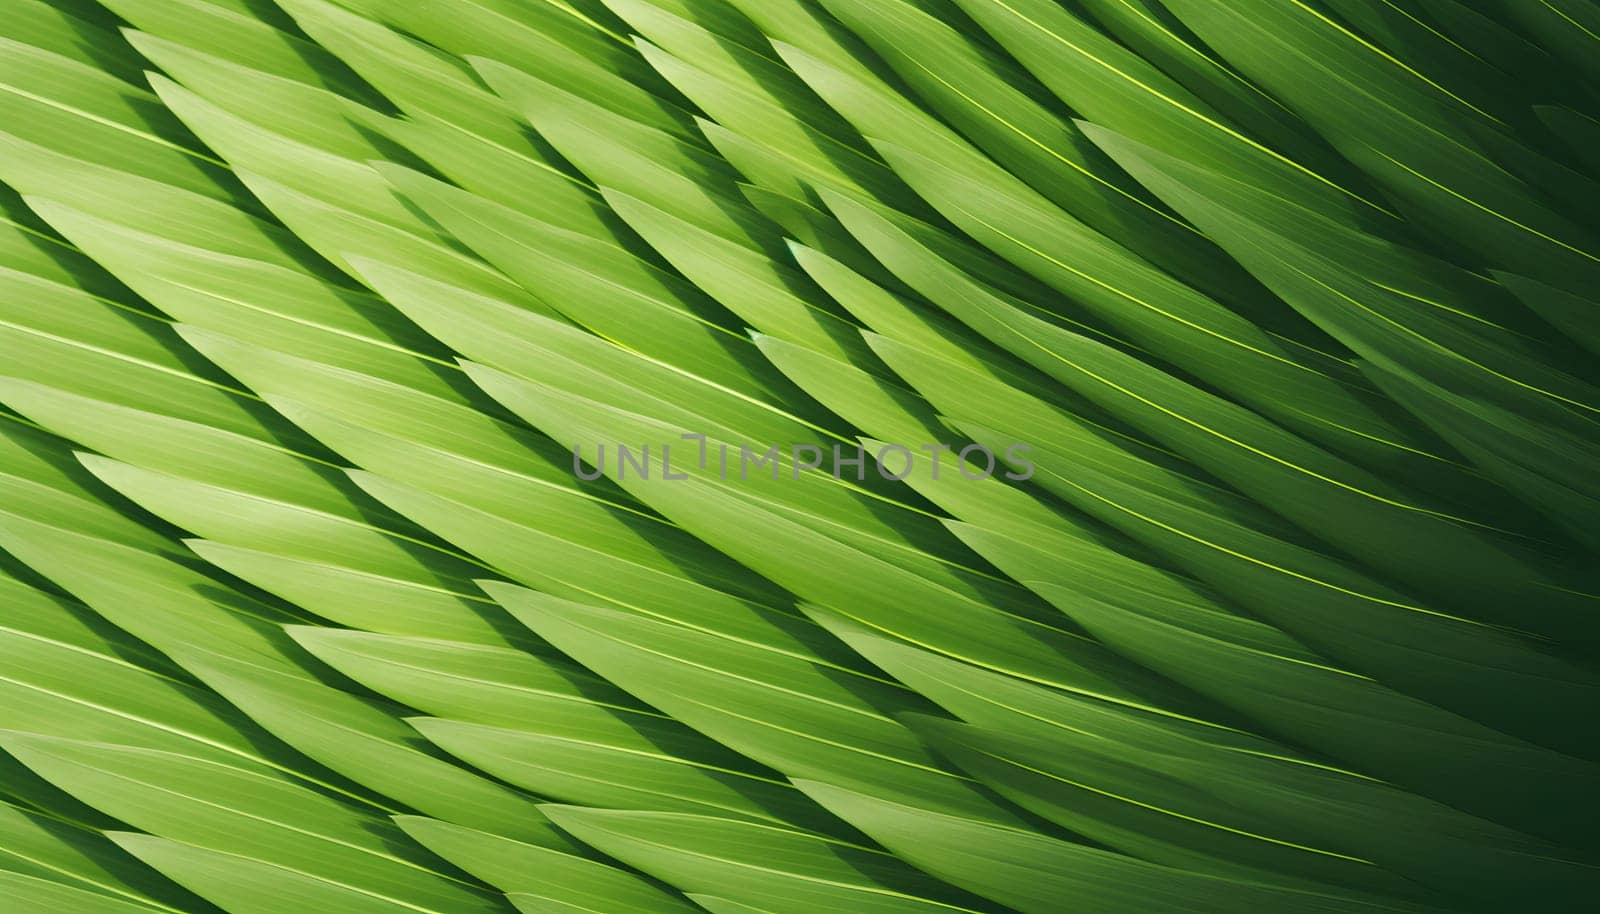 Emerald Elegance: A Captivating Close-Up of a Striped Palm Leaf by Nadtochiy